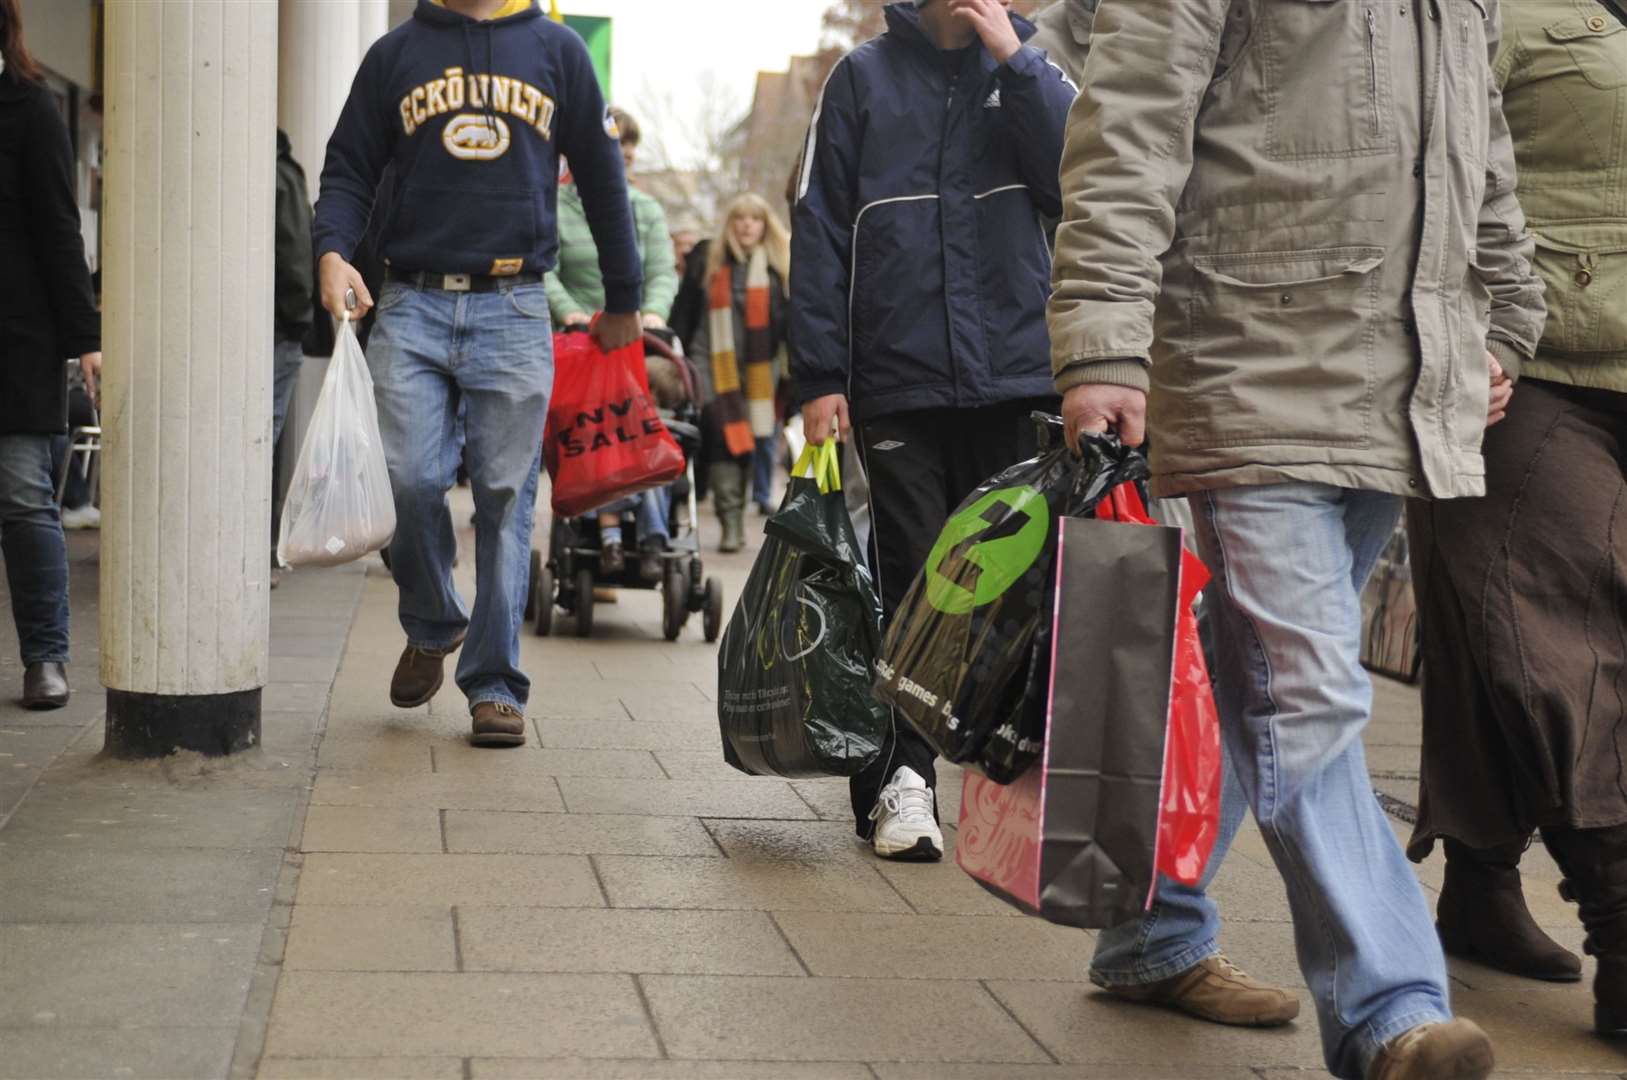 More shoppers will be back from Monday - but there won't be scenes like this